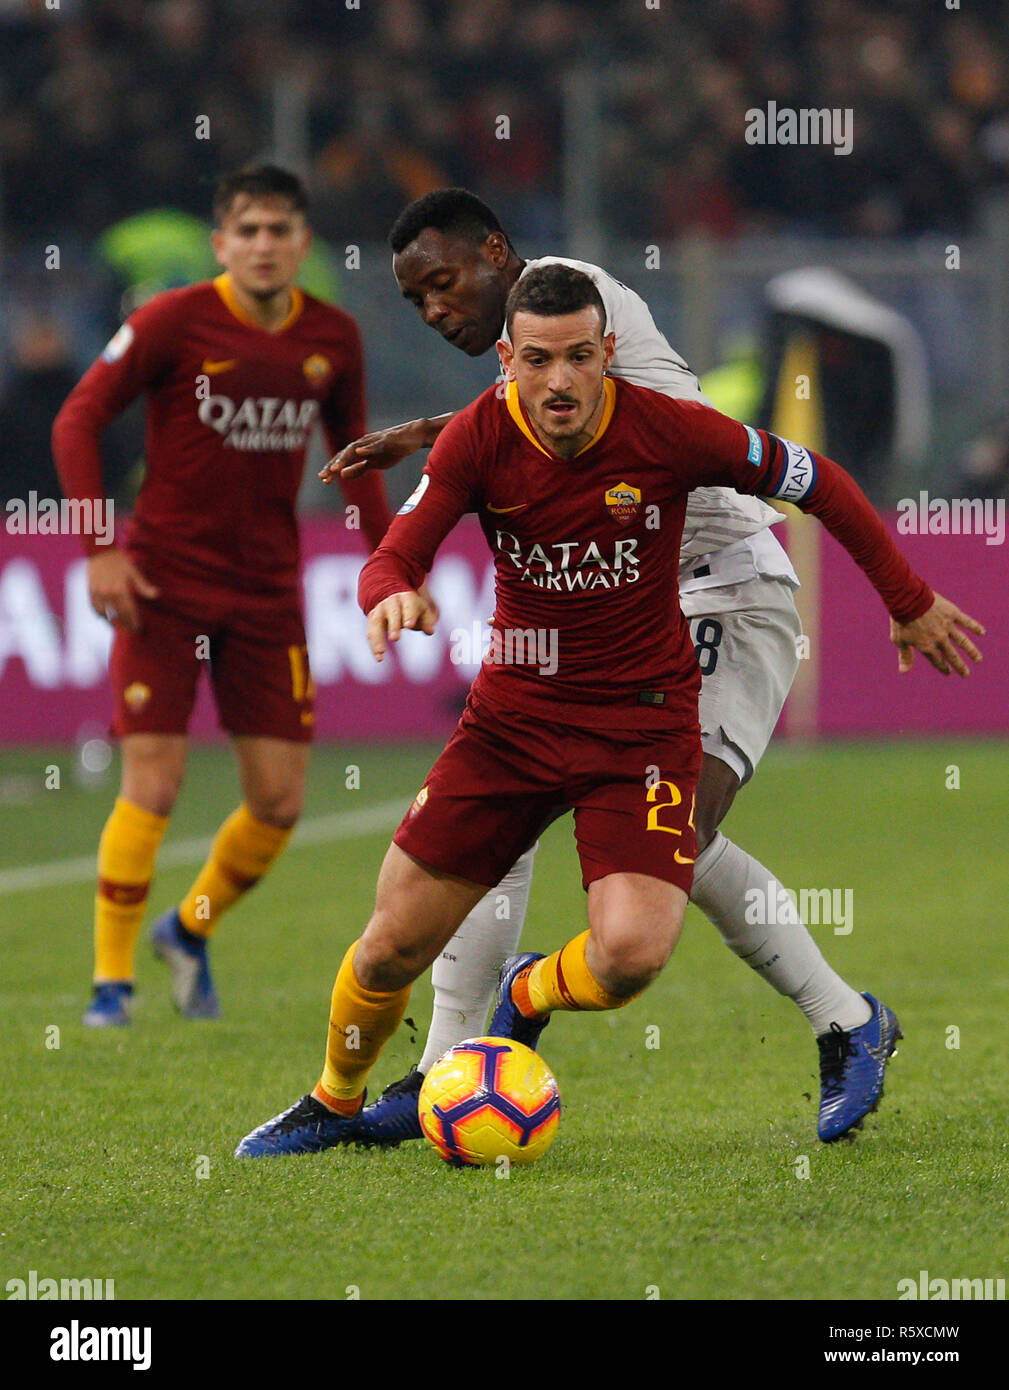 Rome, Italy. 2nd Dec, 2018. Roma's Alessandro Florenzi, foreground, is challenged by Inter's Kwadwo Asamoah during the Serie A soccer match between Roma and Inter at the Olympic Stadium. Credit: UPDATE IMAGES/ Alamy Live News Stock Photo